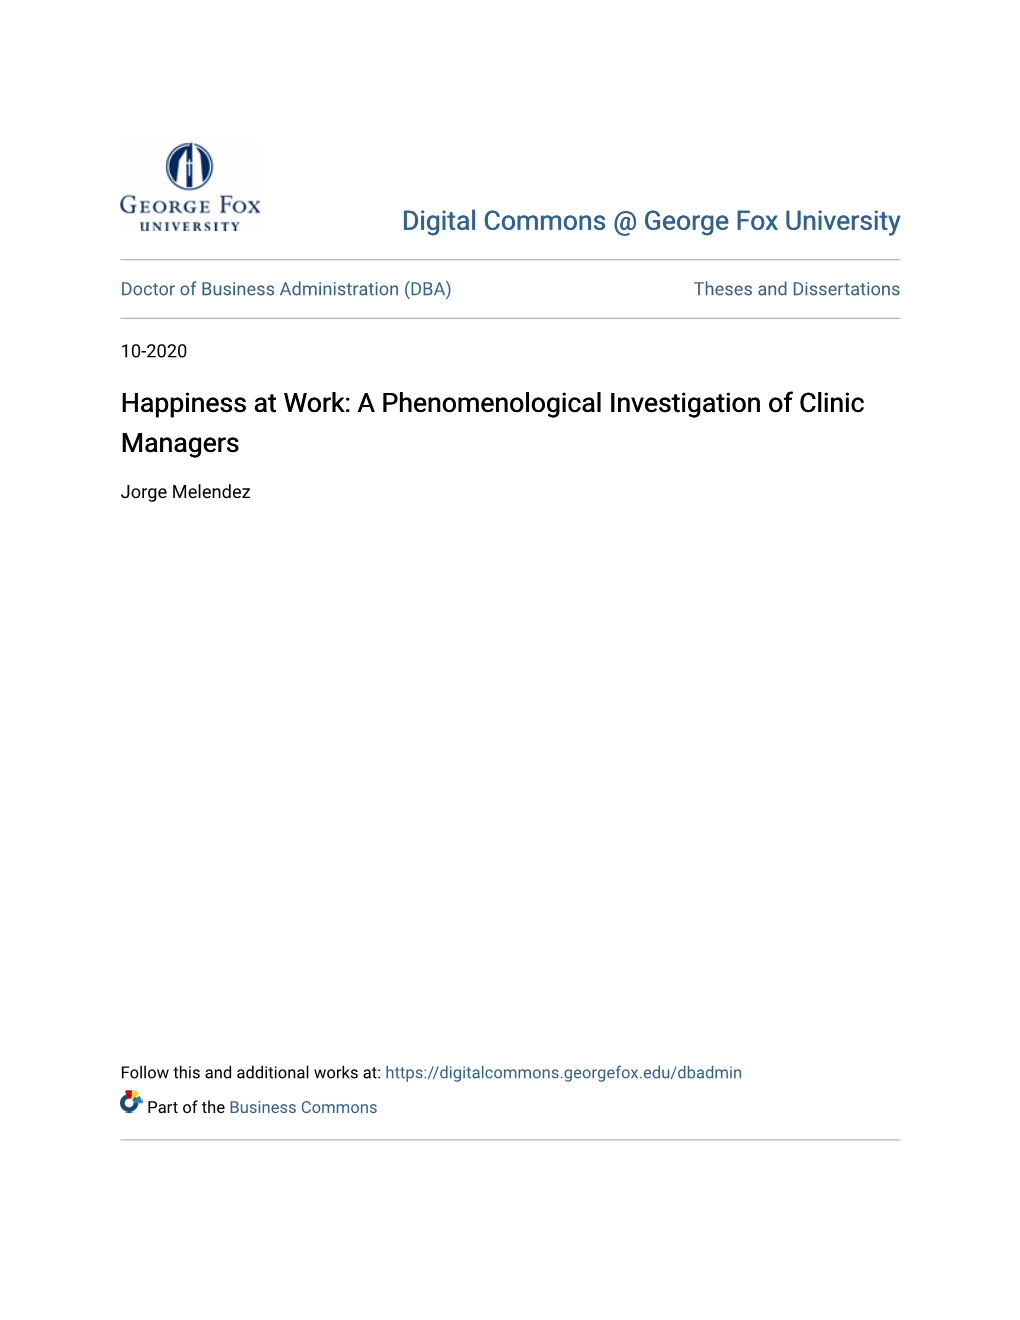 A Phenomenological Investigation of Clinic Managers